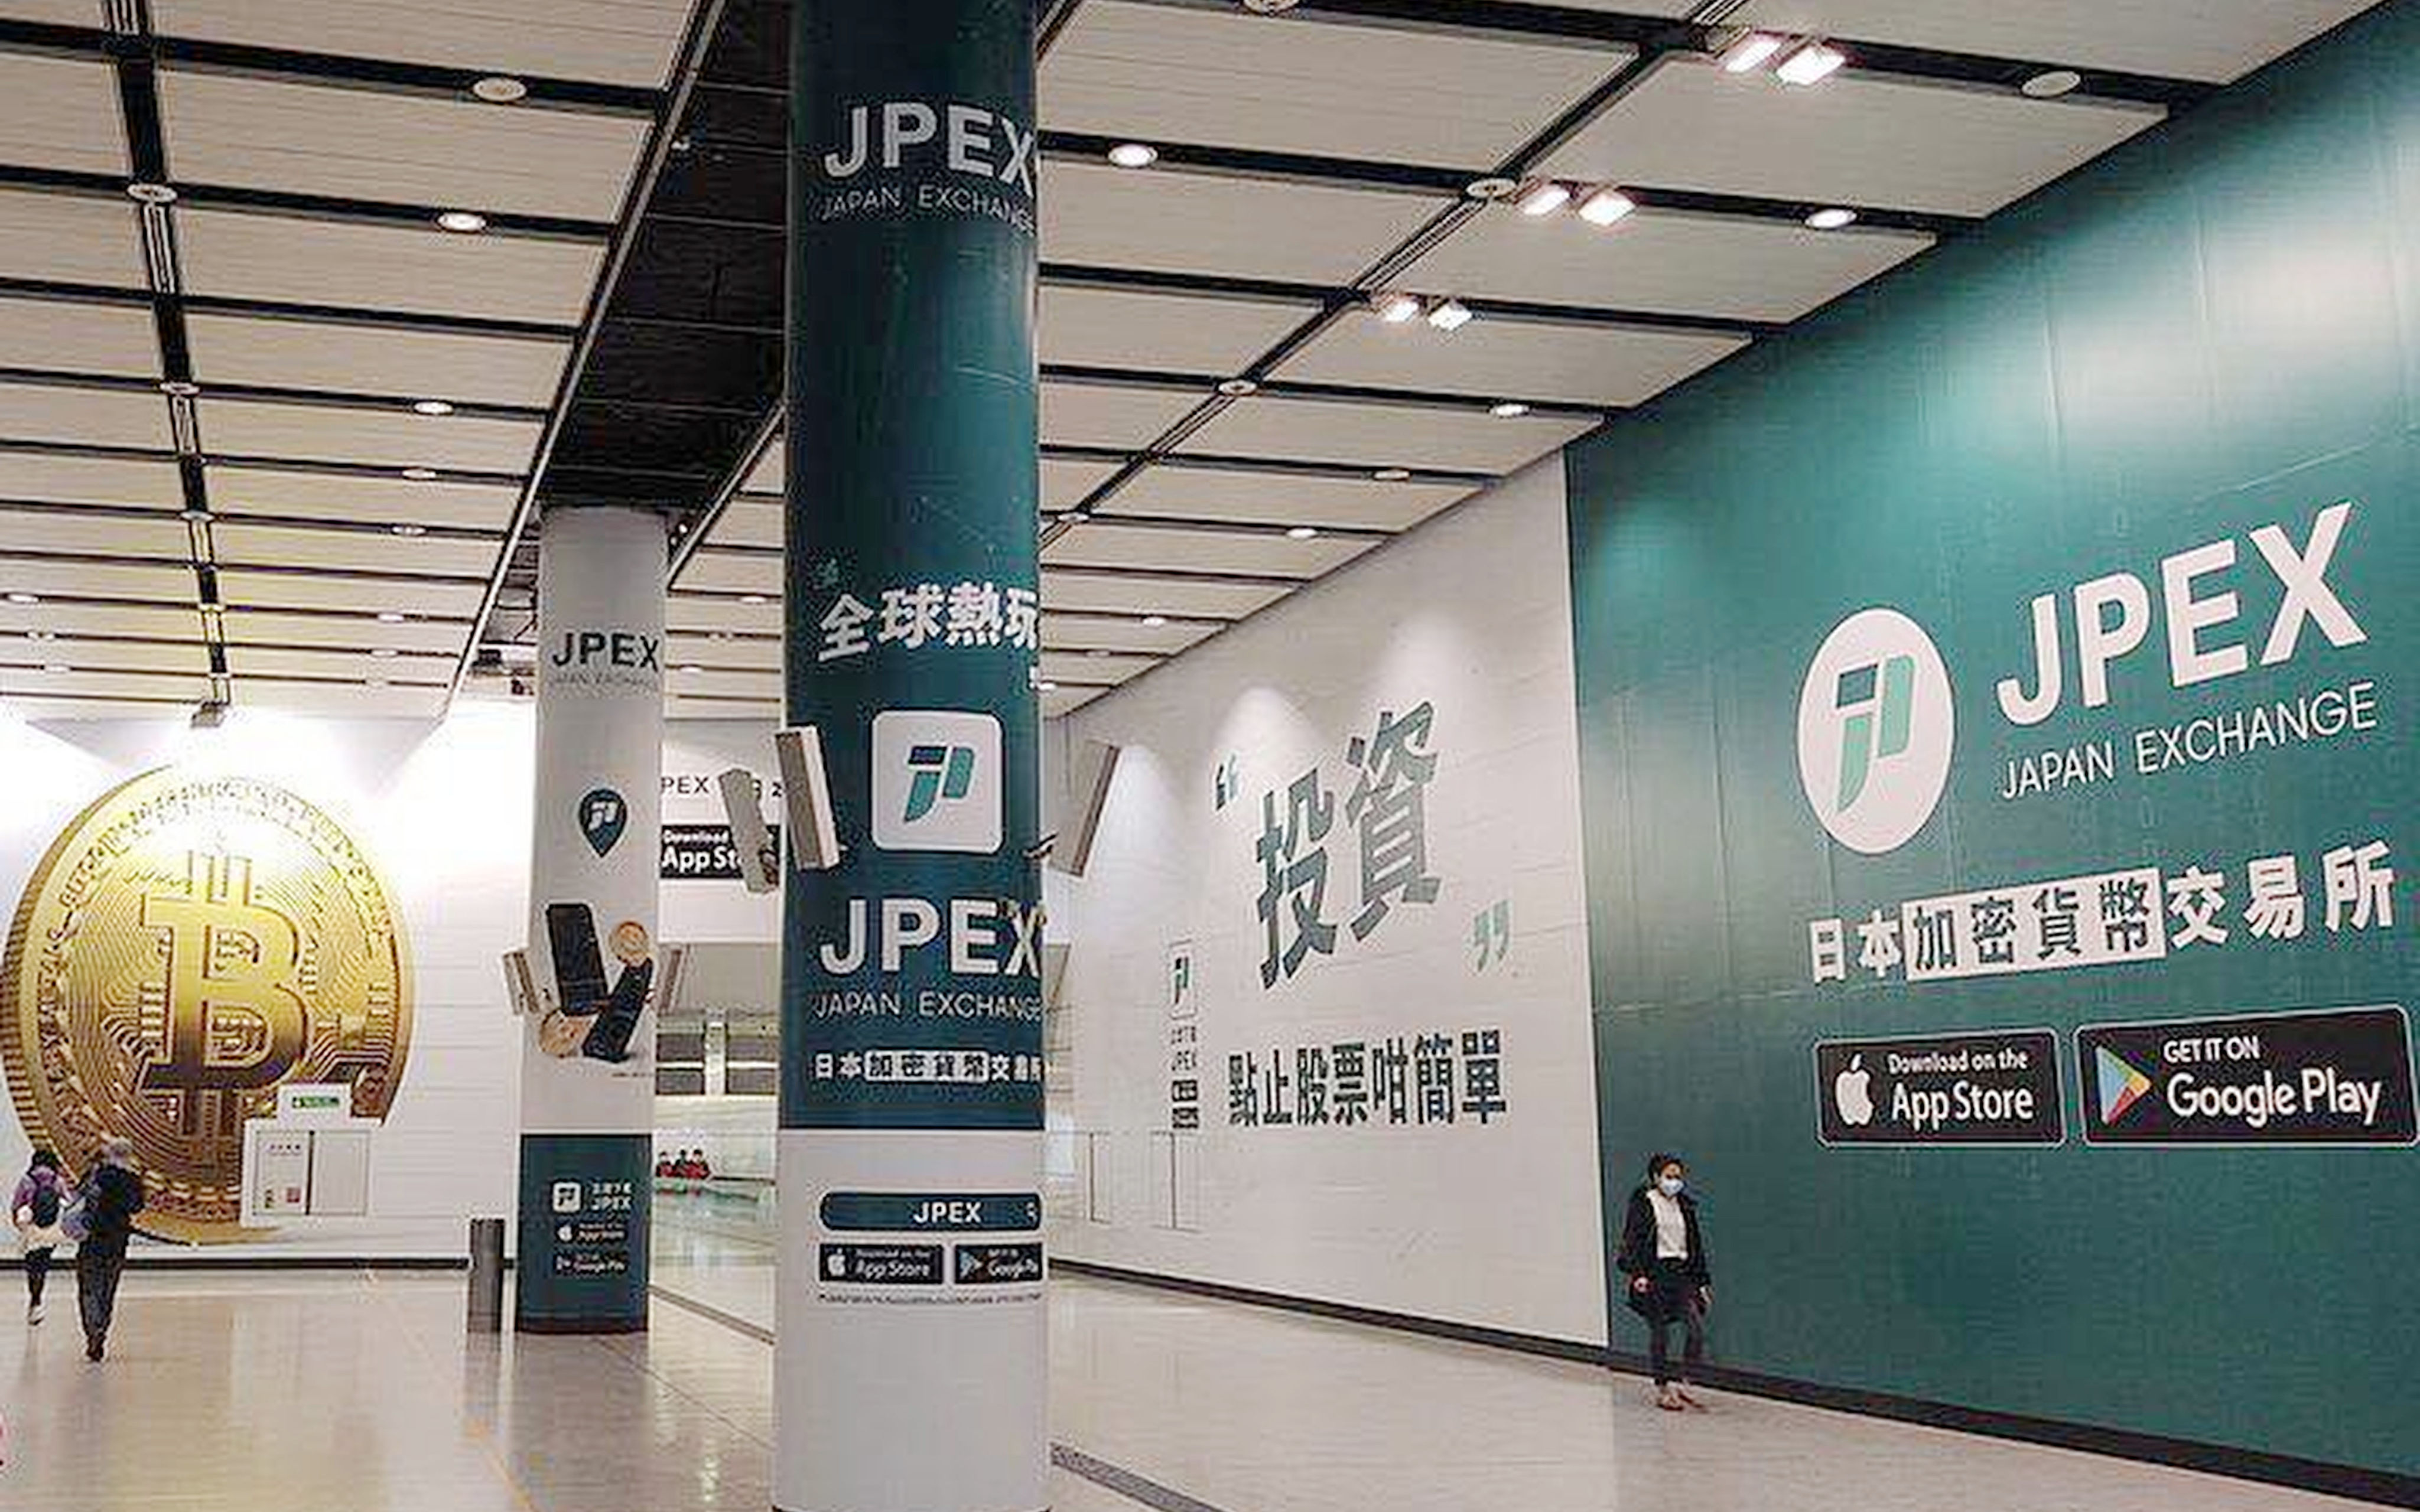 Unlicensed cryptocurrency trading platform JPEX previously purchased adverts placed in MTR stations across the city. Photo: Handout